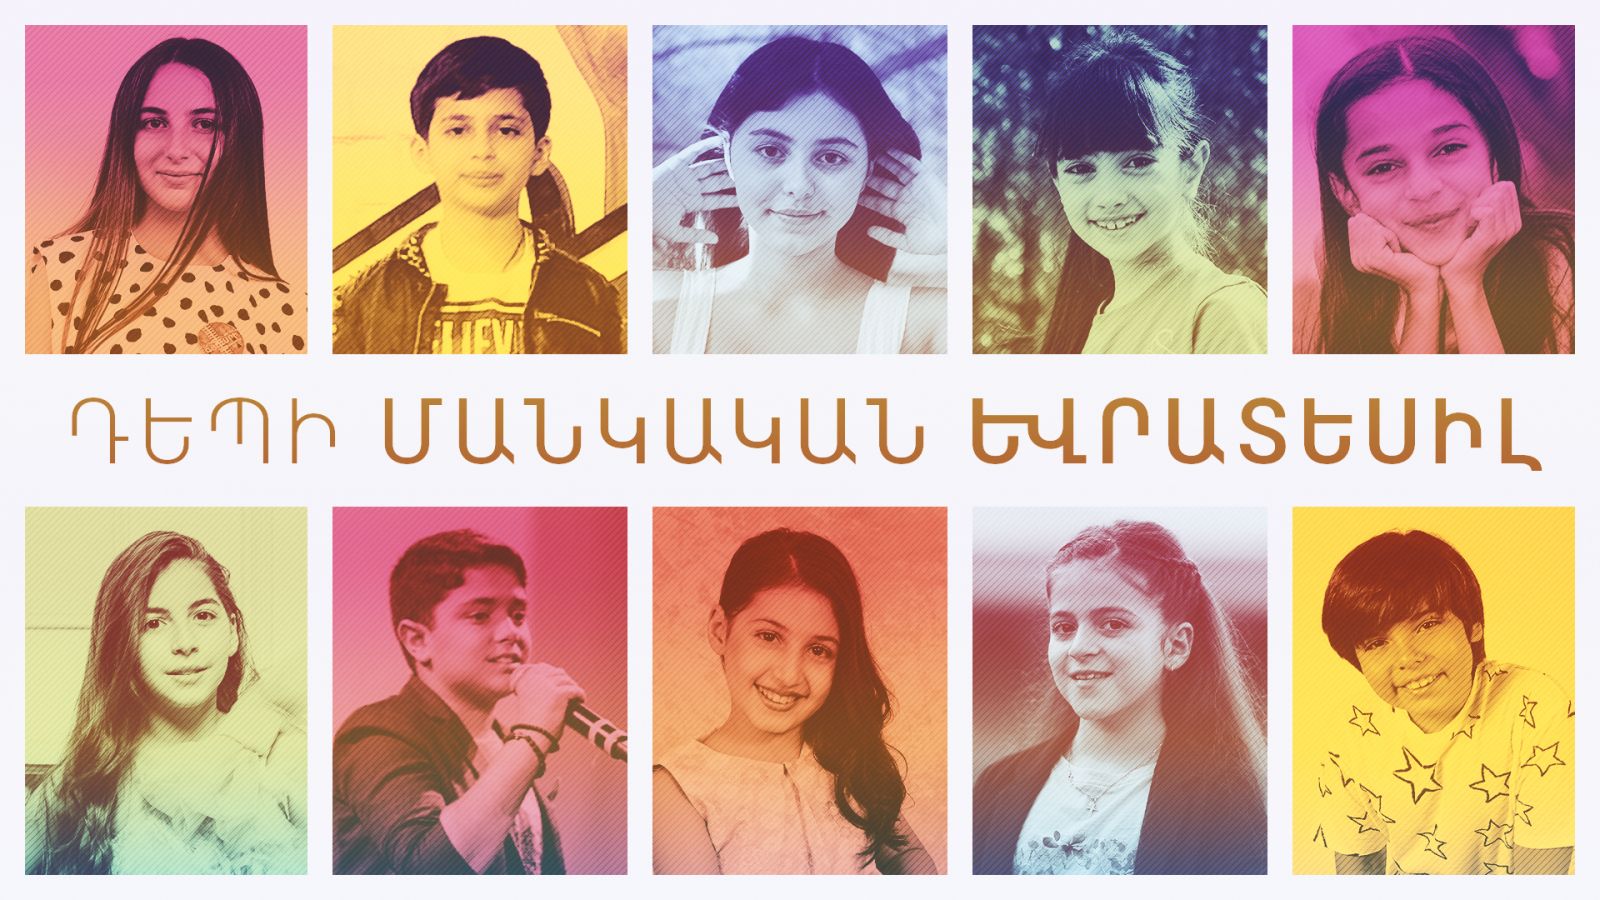 Junior Eurovision: These are the 10 candidates willing to represent Armenia in Poland